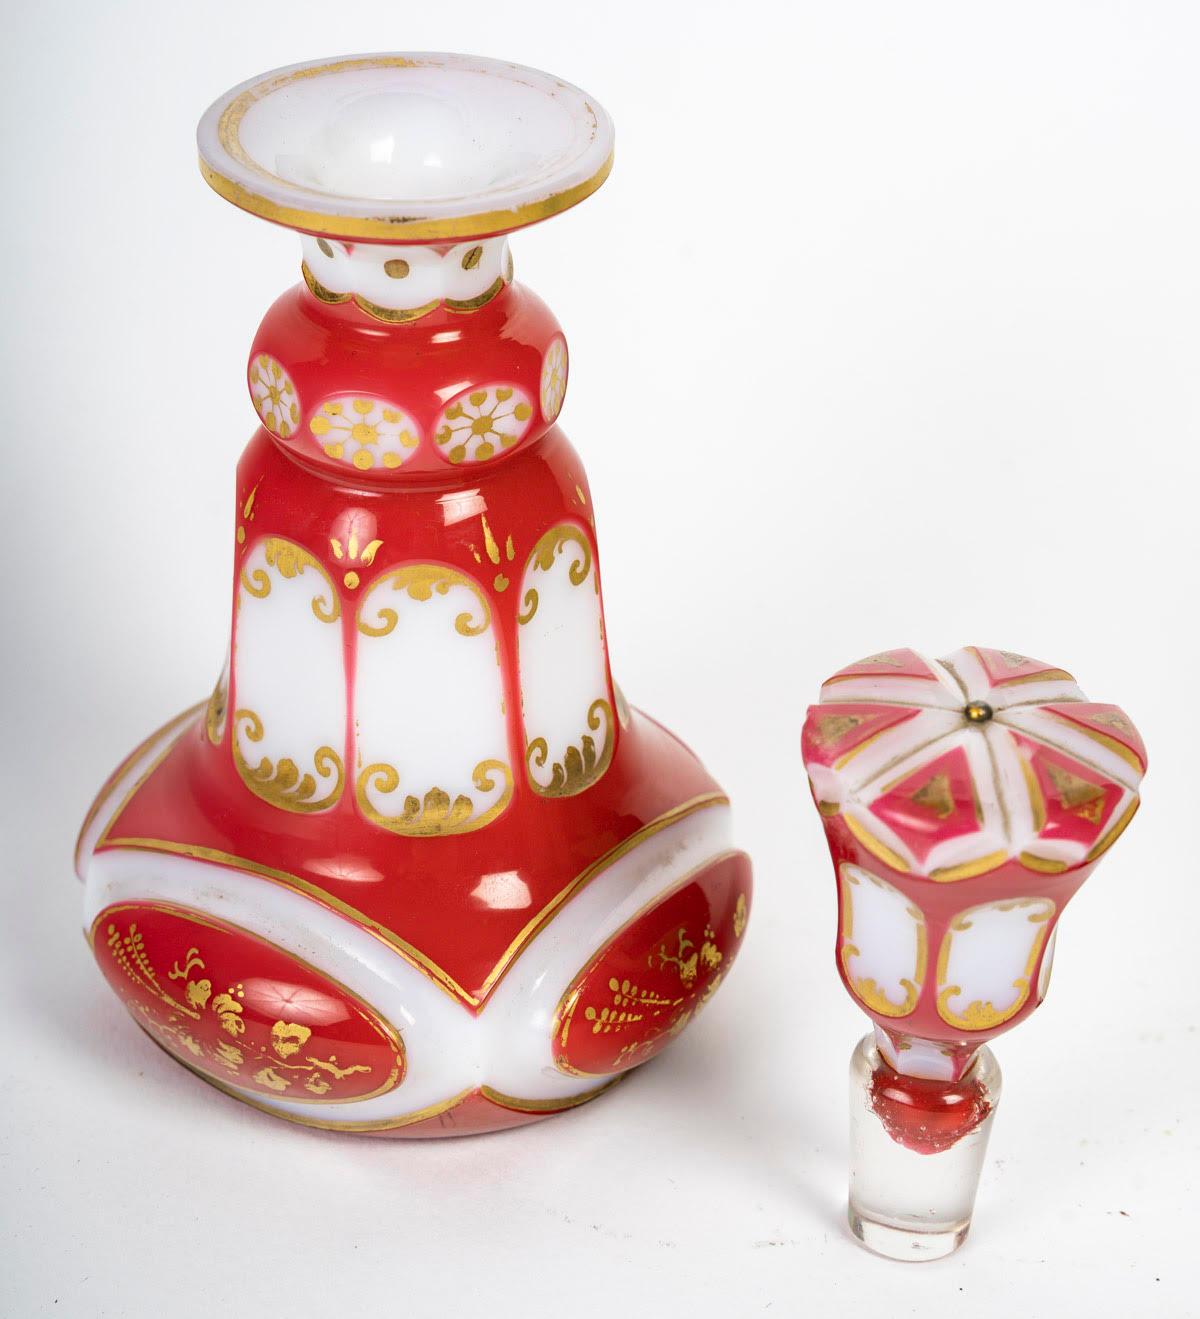 Red, gold and white opaline overlay bottle, 19th century, Napoleon III period.

Bottle in red, gold and white opaline overlay, 19th century, Napoleon III period.
H: 17cm D: 9cm